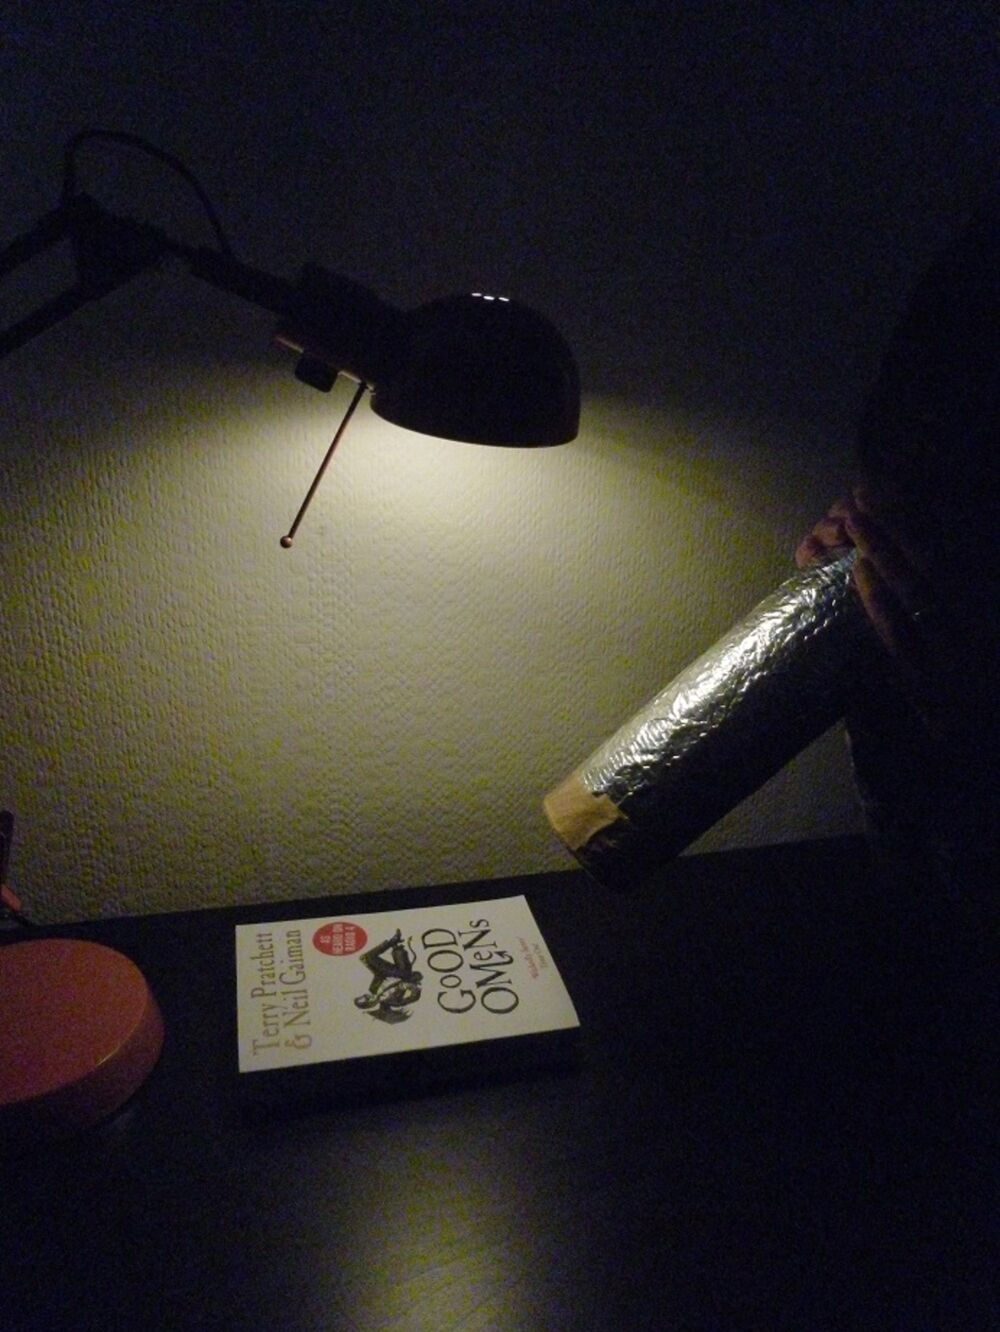 A book on a black table under a lamp, with someone pointing a Pringles tin wrapped in foil (the pinhole camera) at it.